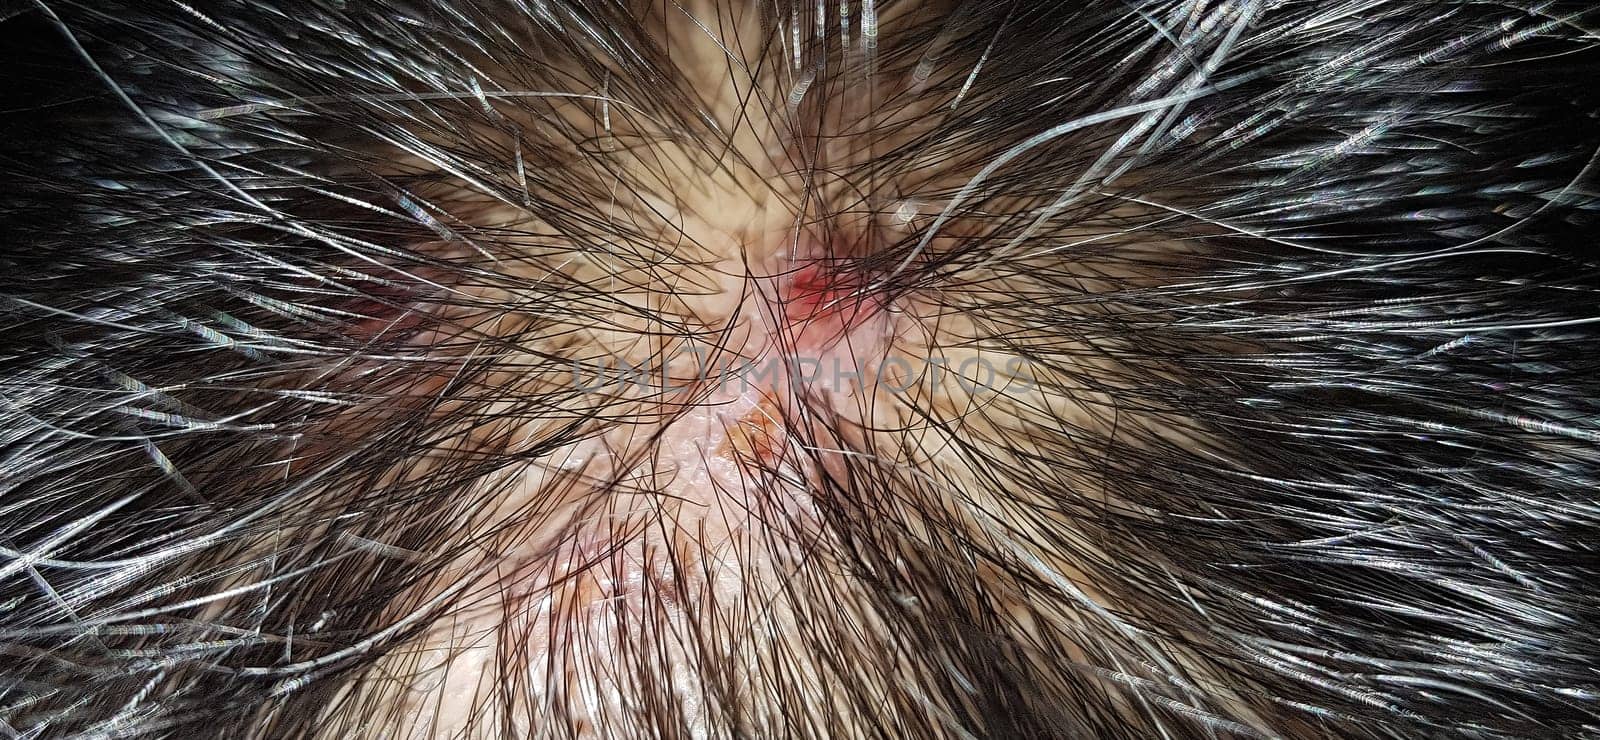 Scabs On The Scalp, wound on the scalps or Lichen planus follicularis capillitii, itch on the scalps, caused by diabetes on adults